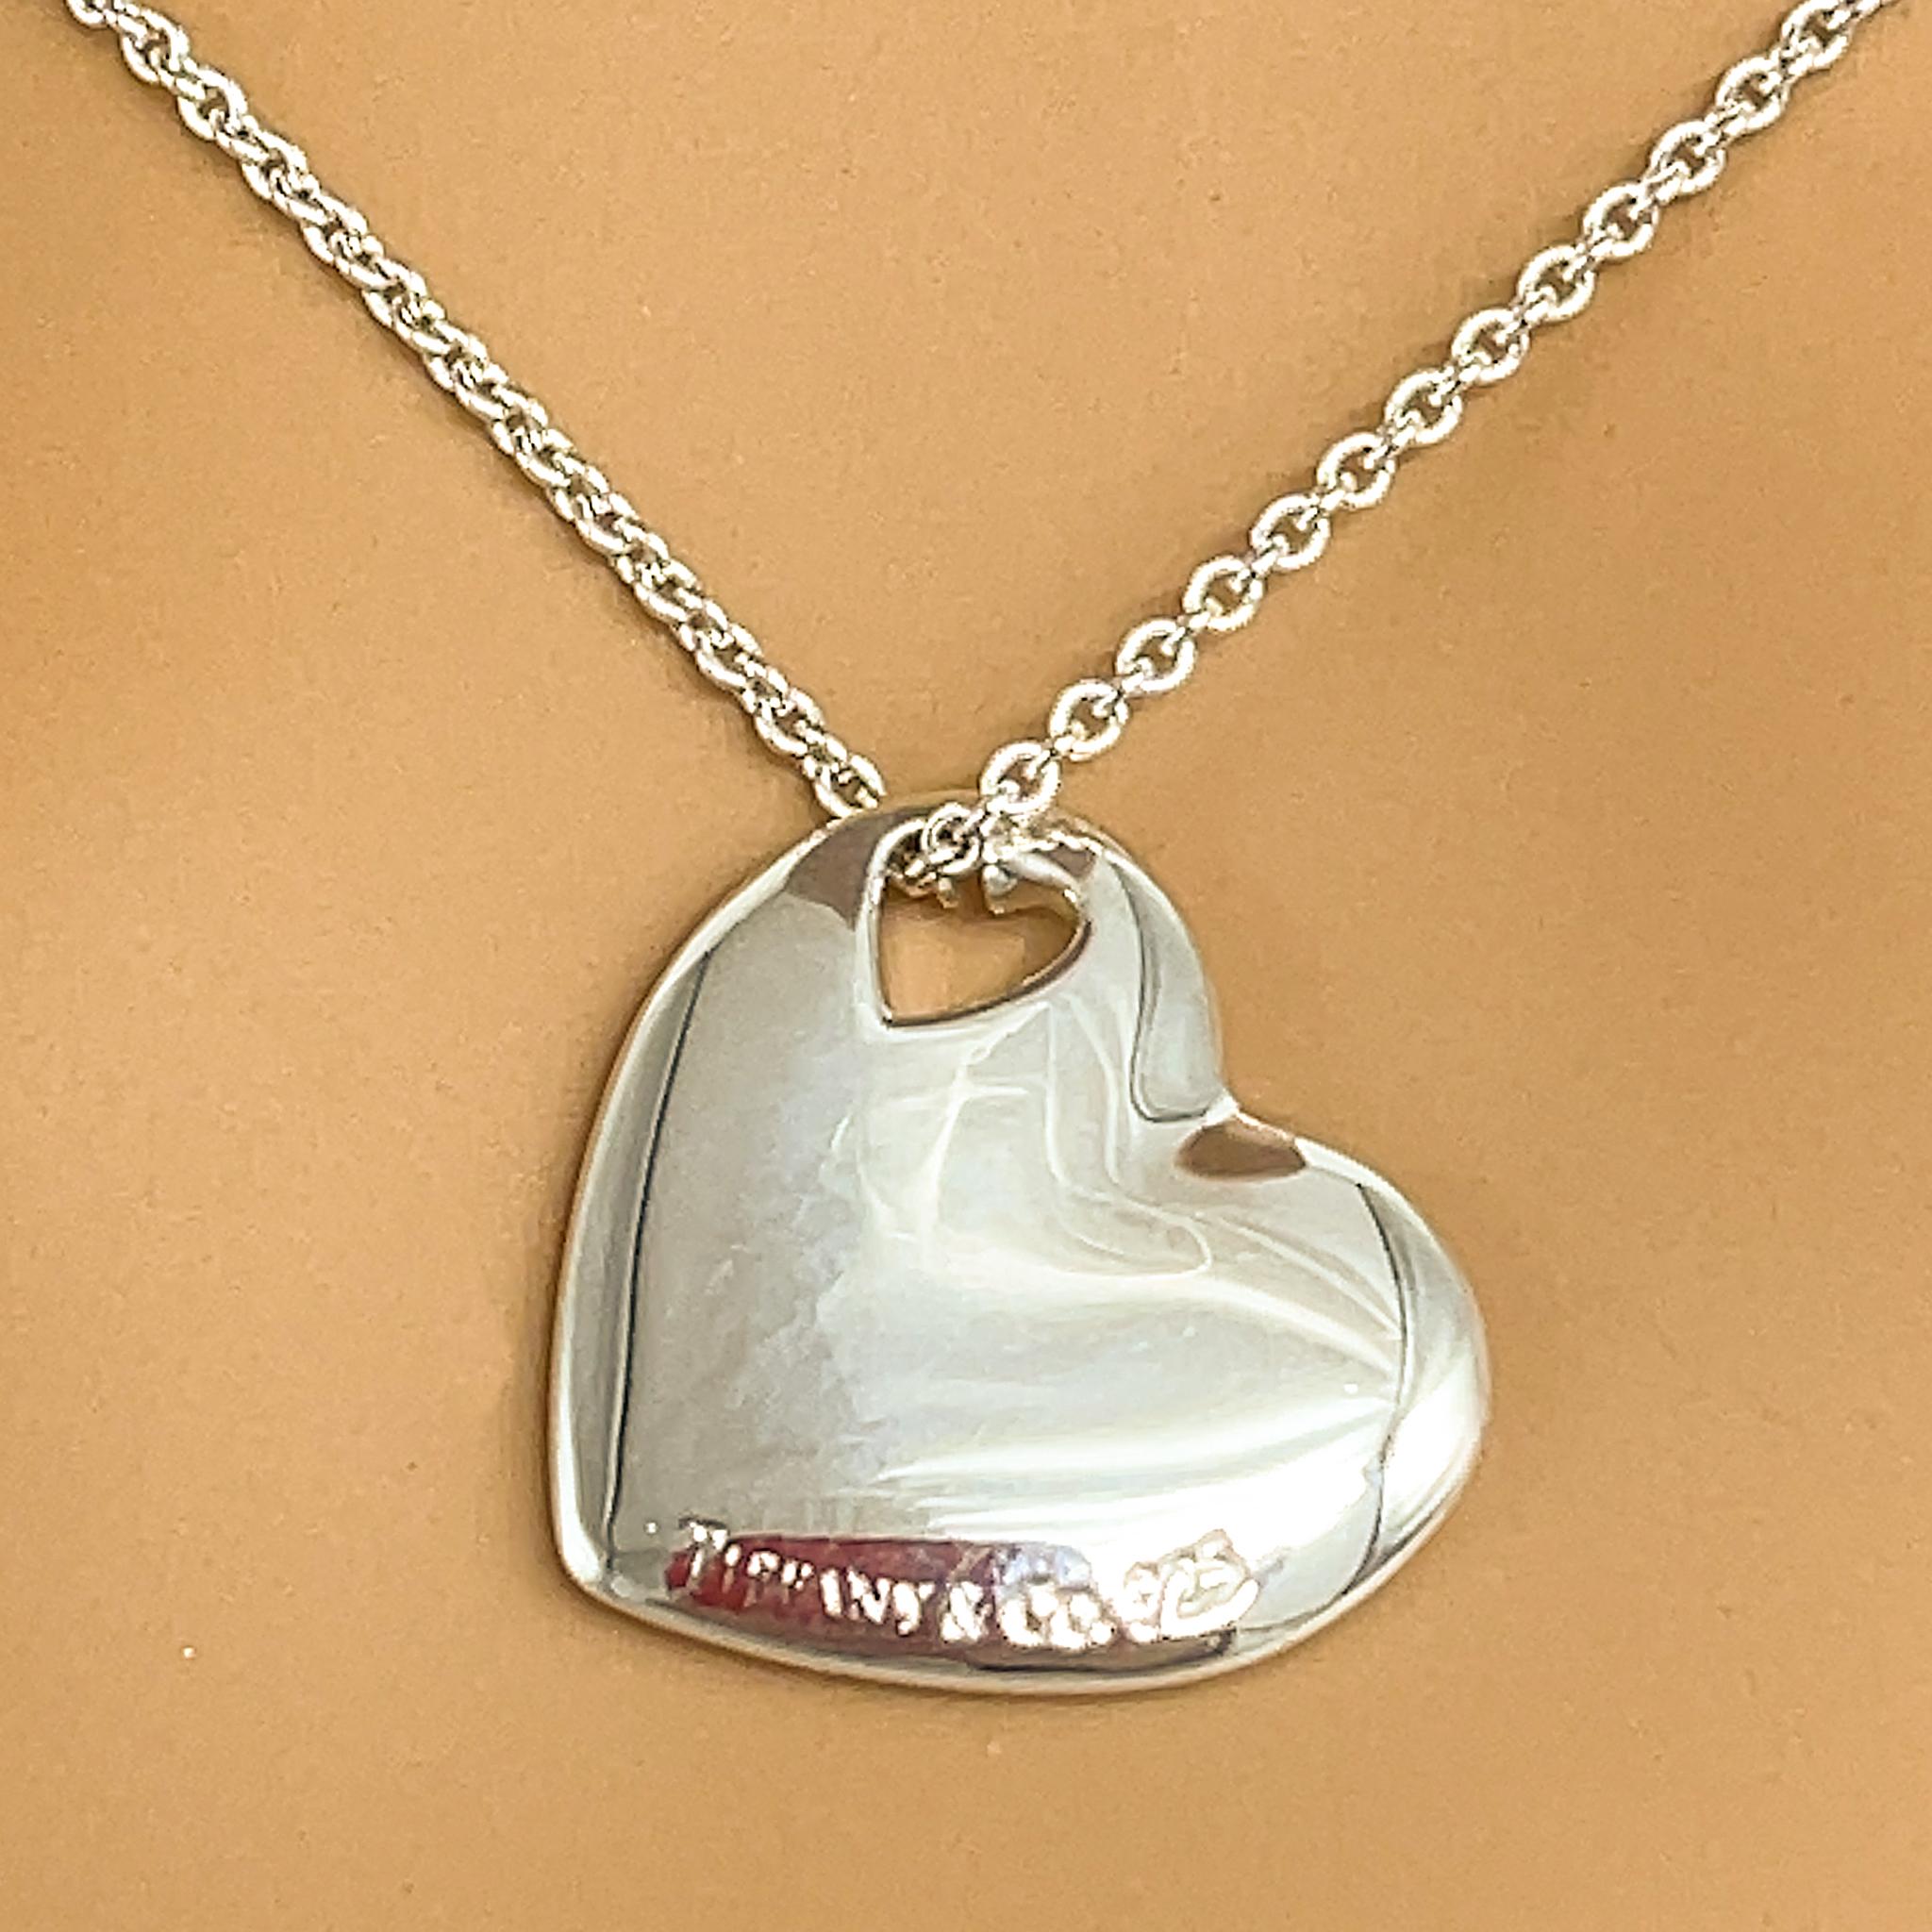 Tiffany and Co. Sterling Silver Cutout Heart Pendant Necklace For Sale 5